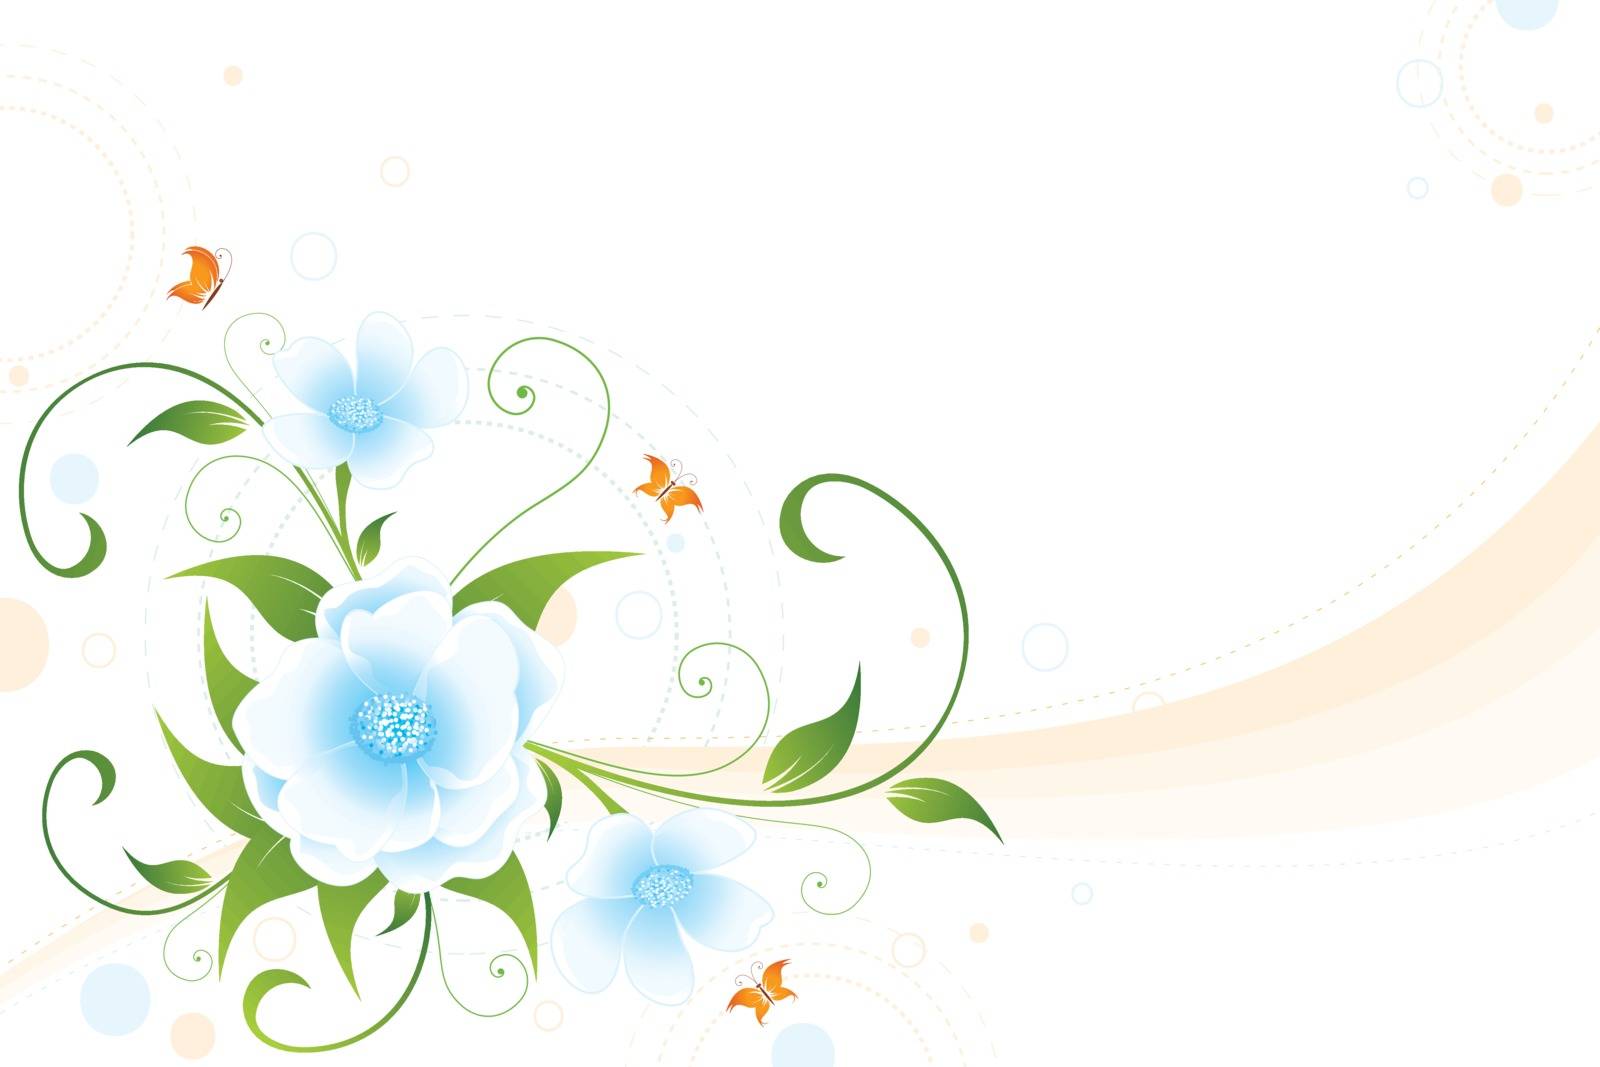 Abstract modern floral background for your design